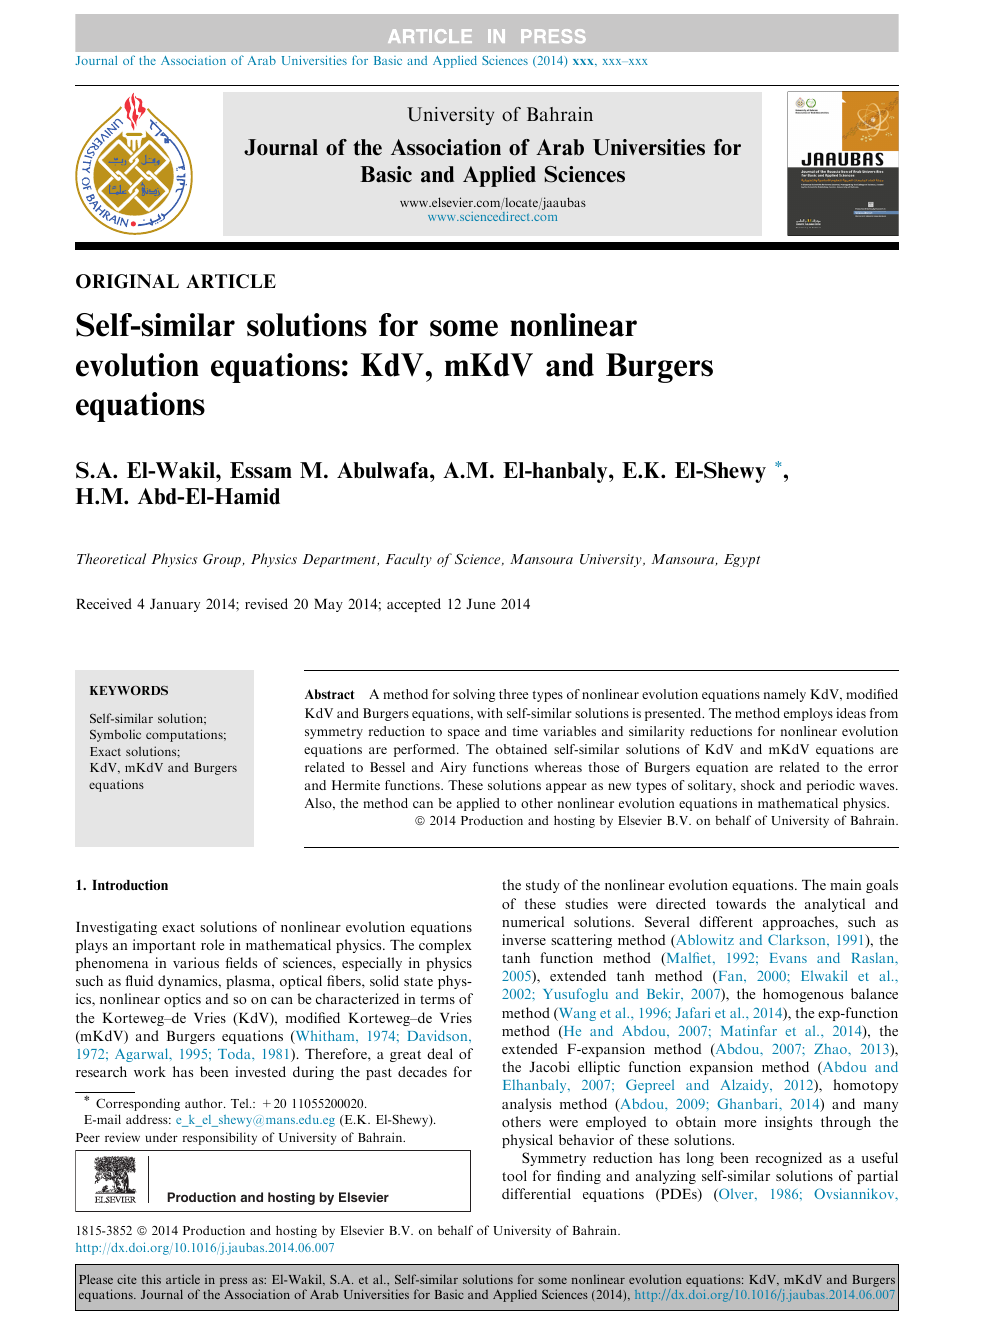 Self Similar Solutions For Some Nonlinear Evolution Equations Kdv Mkdv And Burgers Equations Topic Of Research Paper In Mathematics Download Scholarly Article Pdf And Read For Free On Cyberleninka Open Science Hub